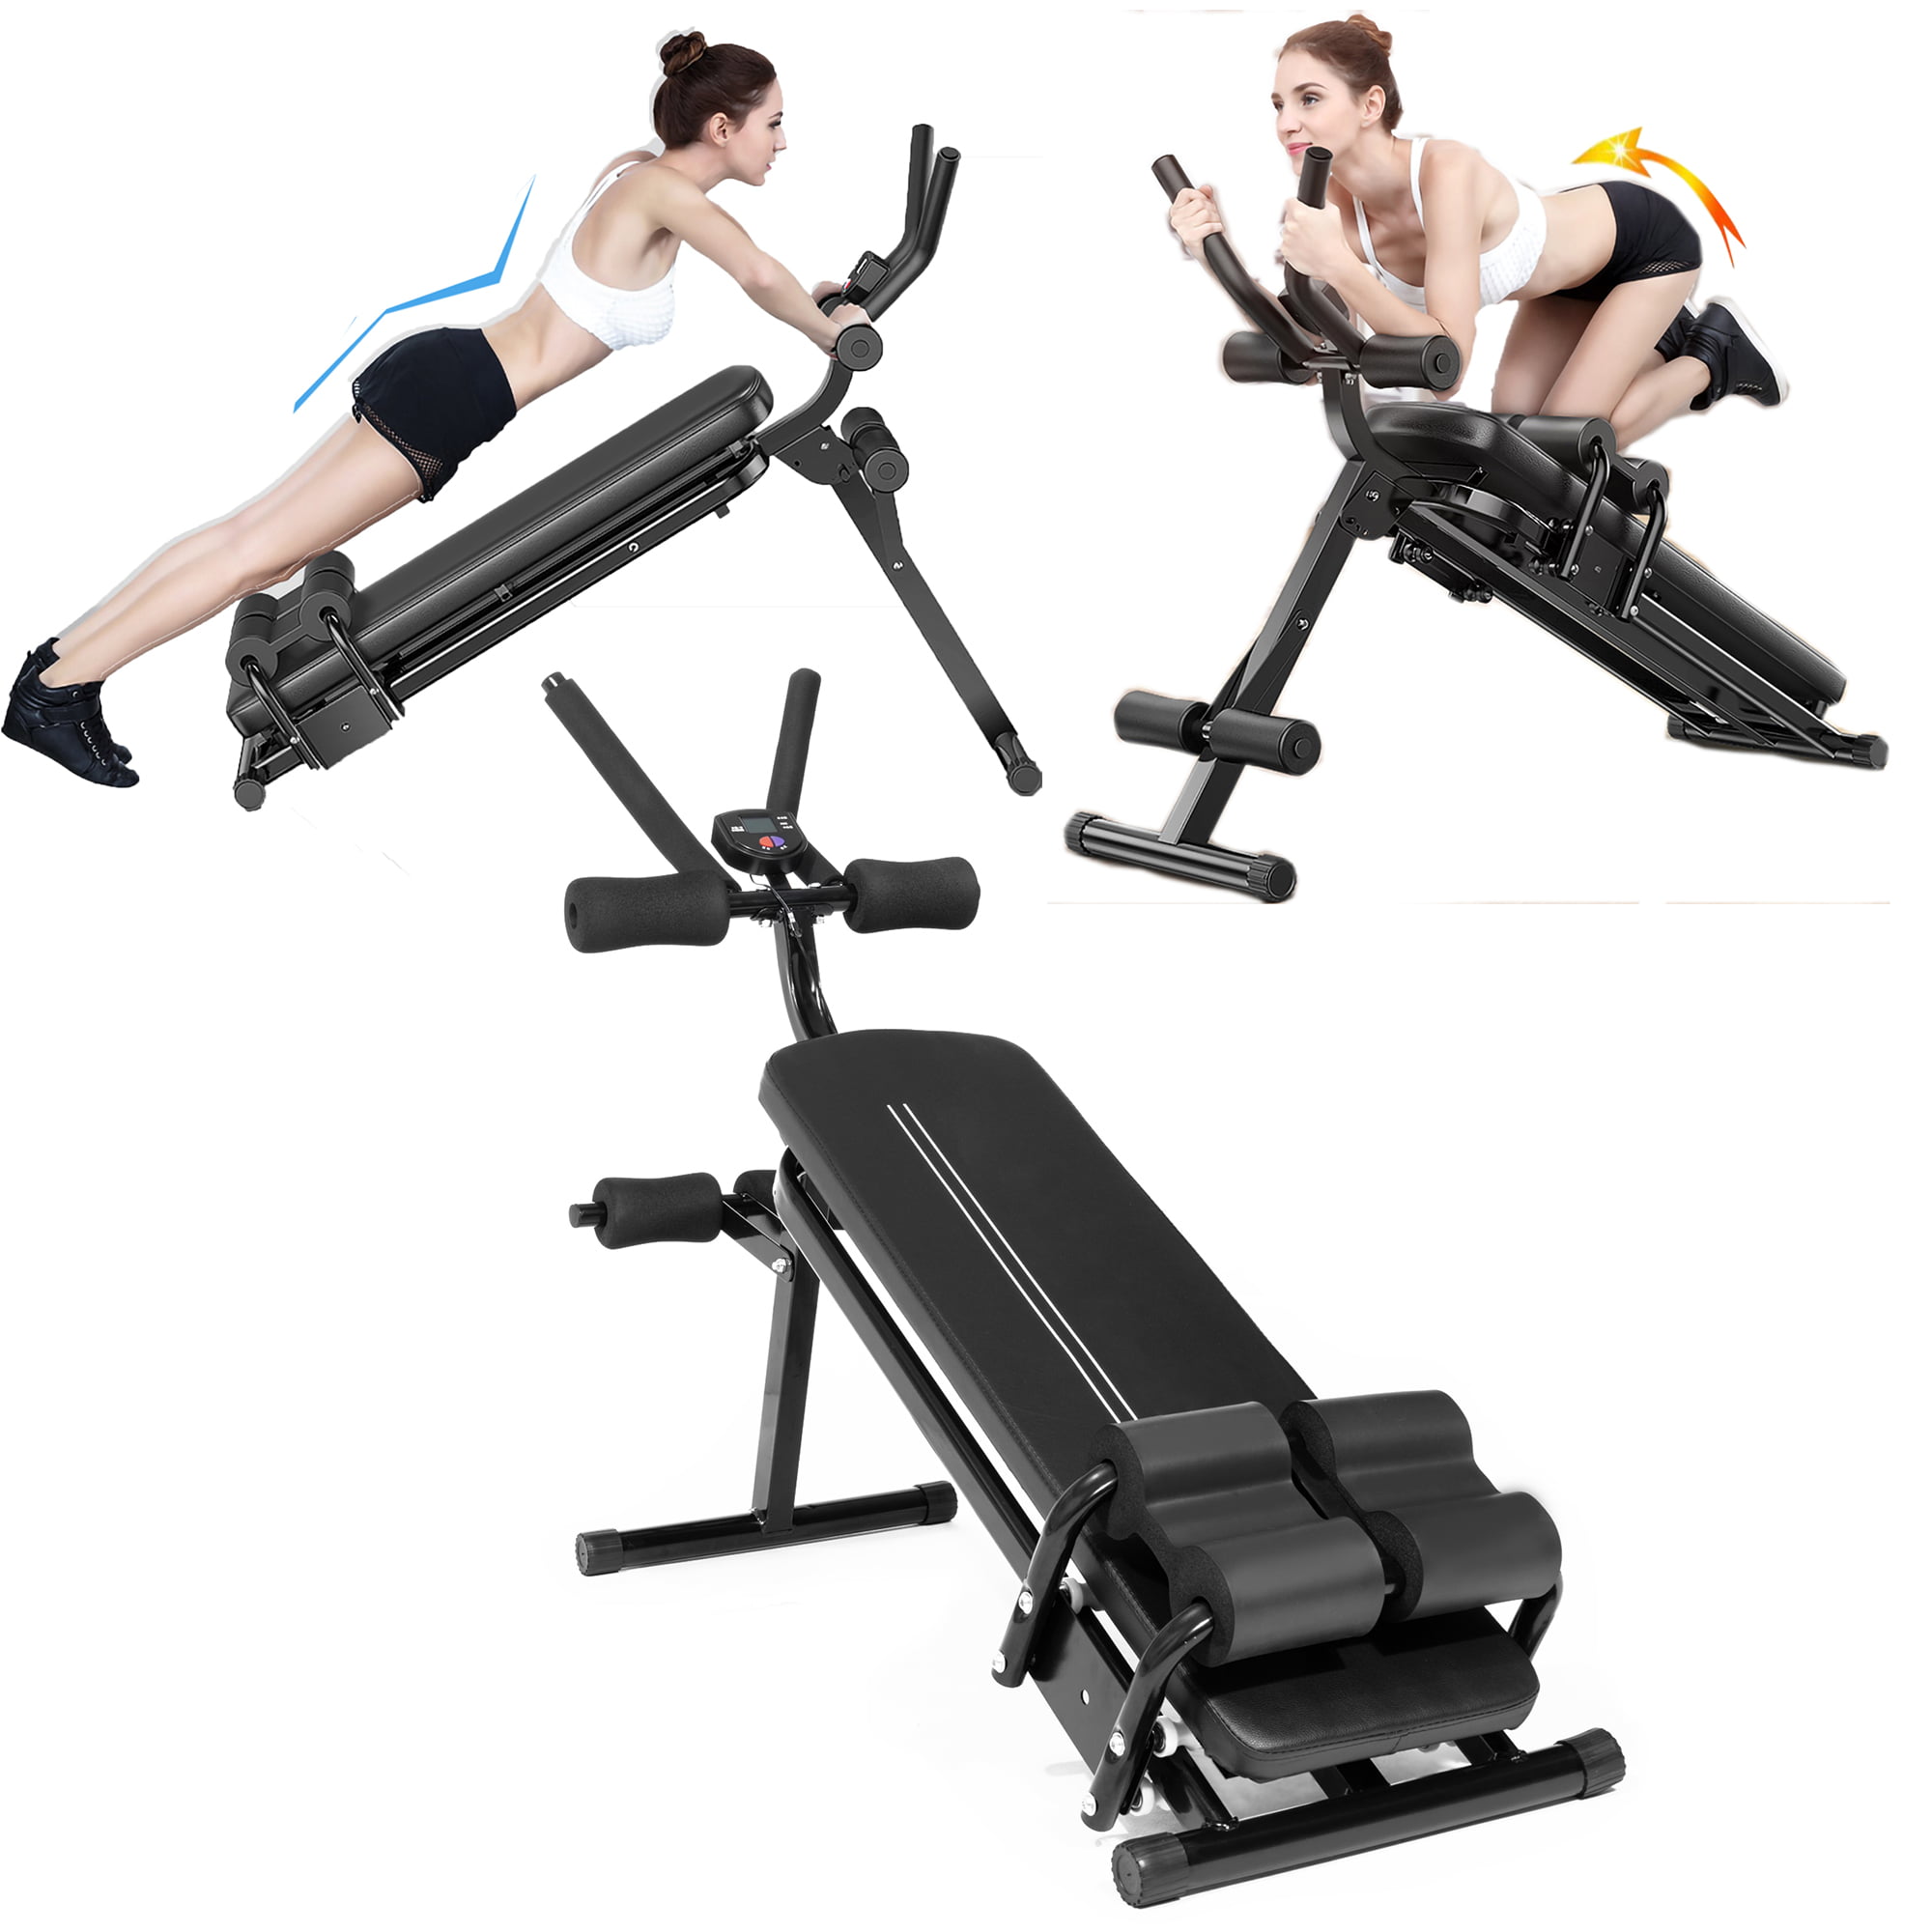 Adjustable Sit Up Bench Decline Home Gym Abs Crunch Equipment Fitness Board 